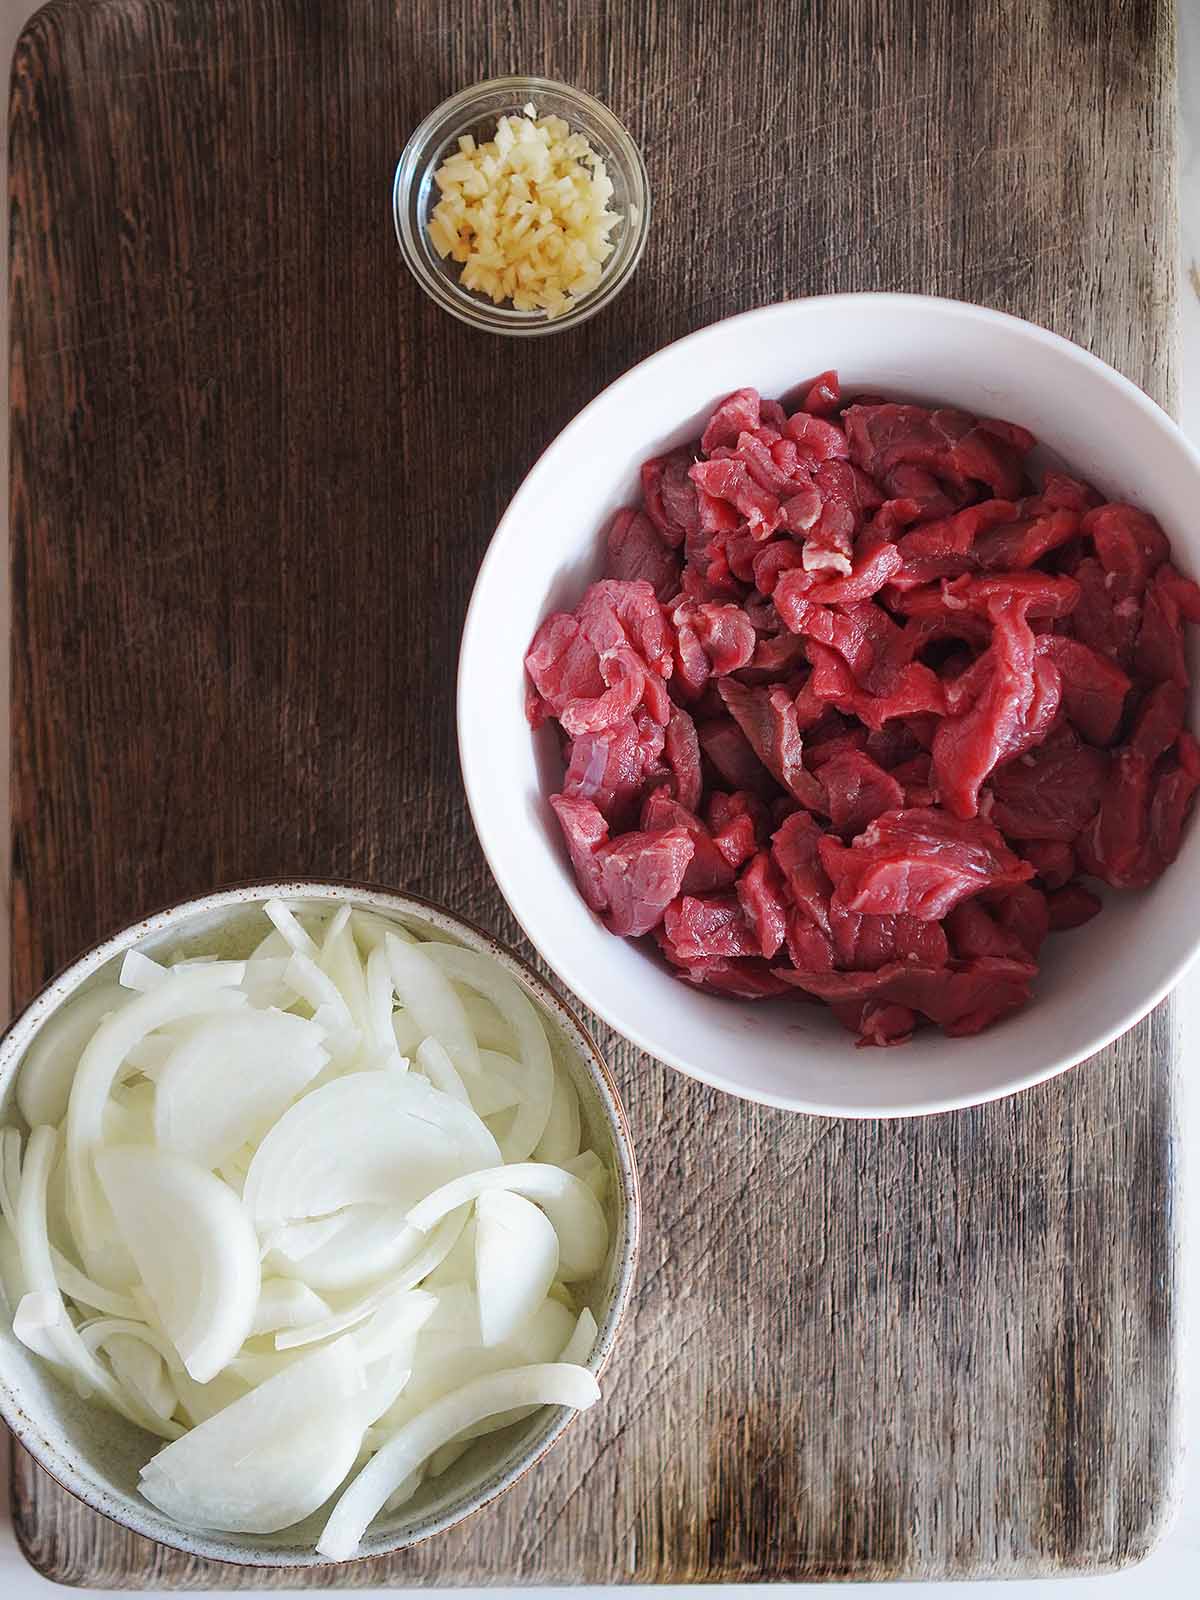 The ingredients for this recipe on a cutting board placed in bowls.